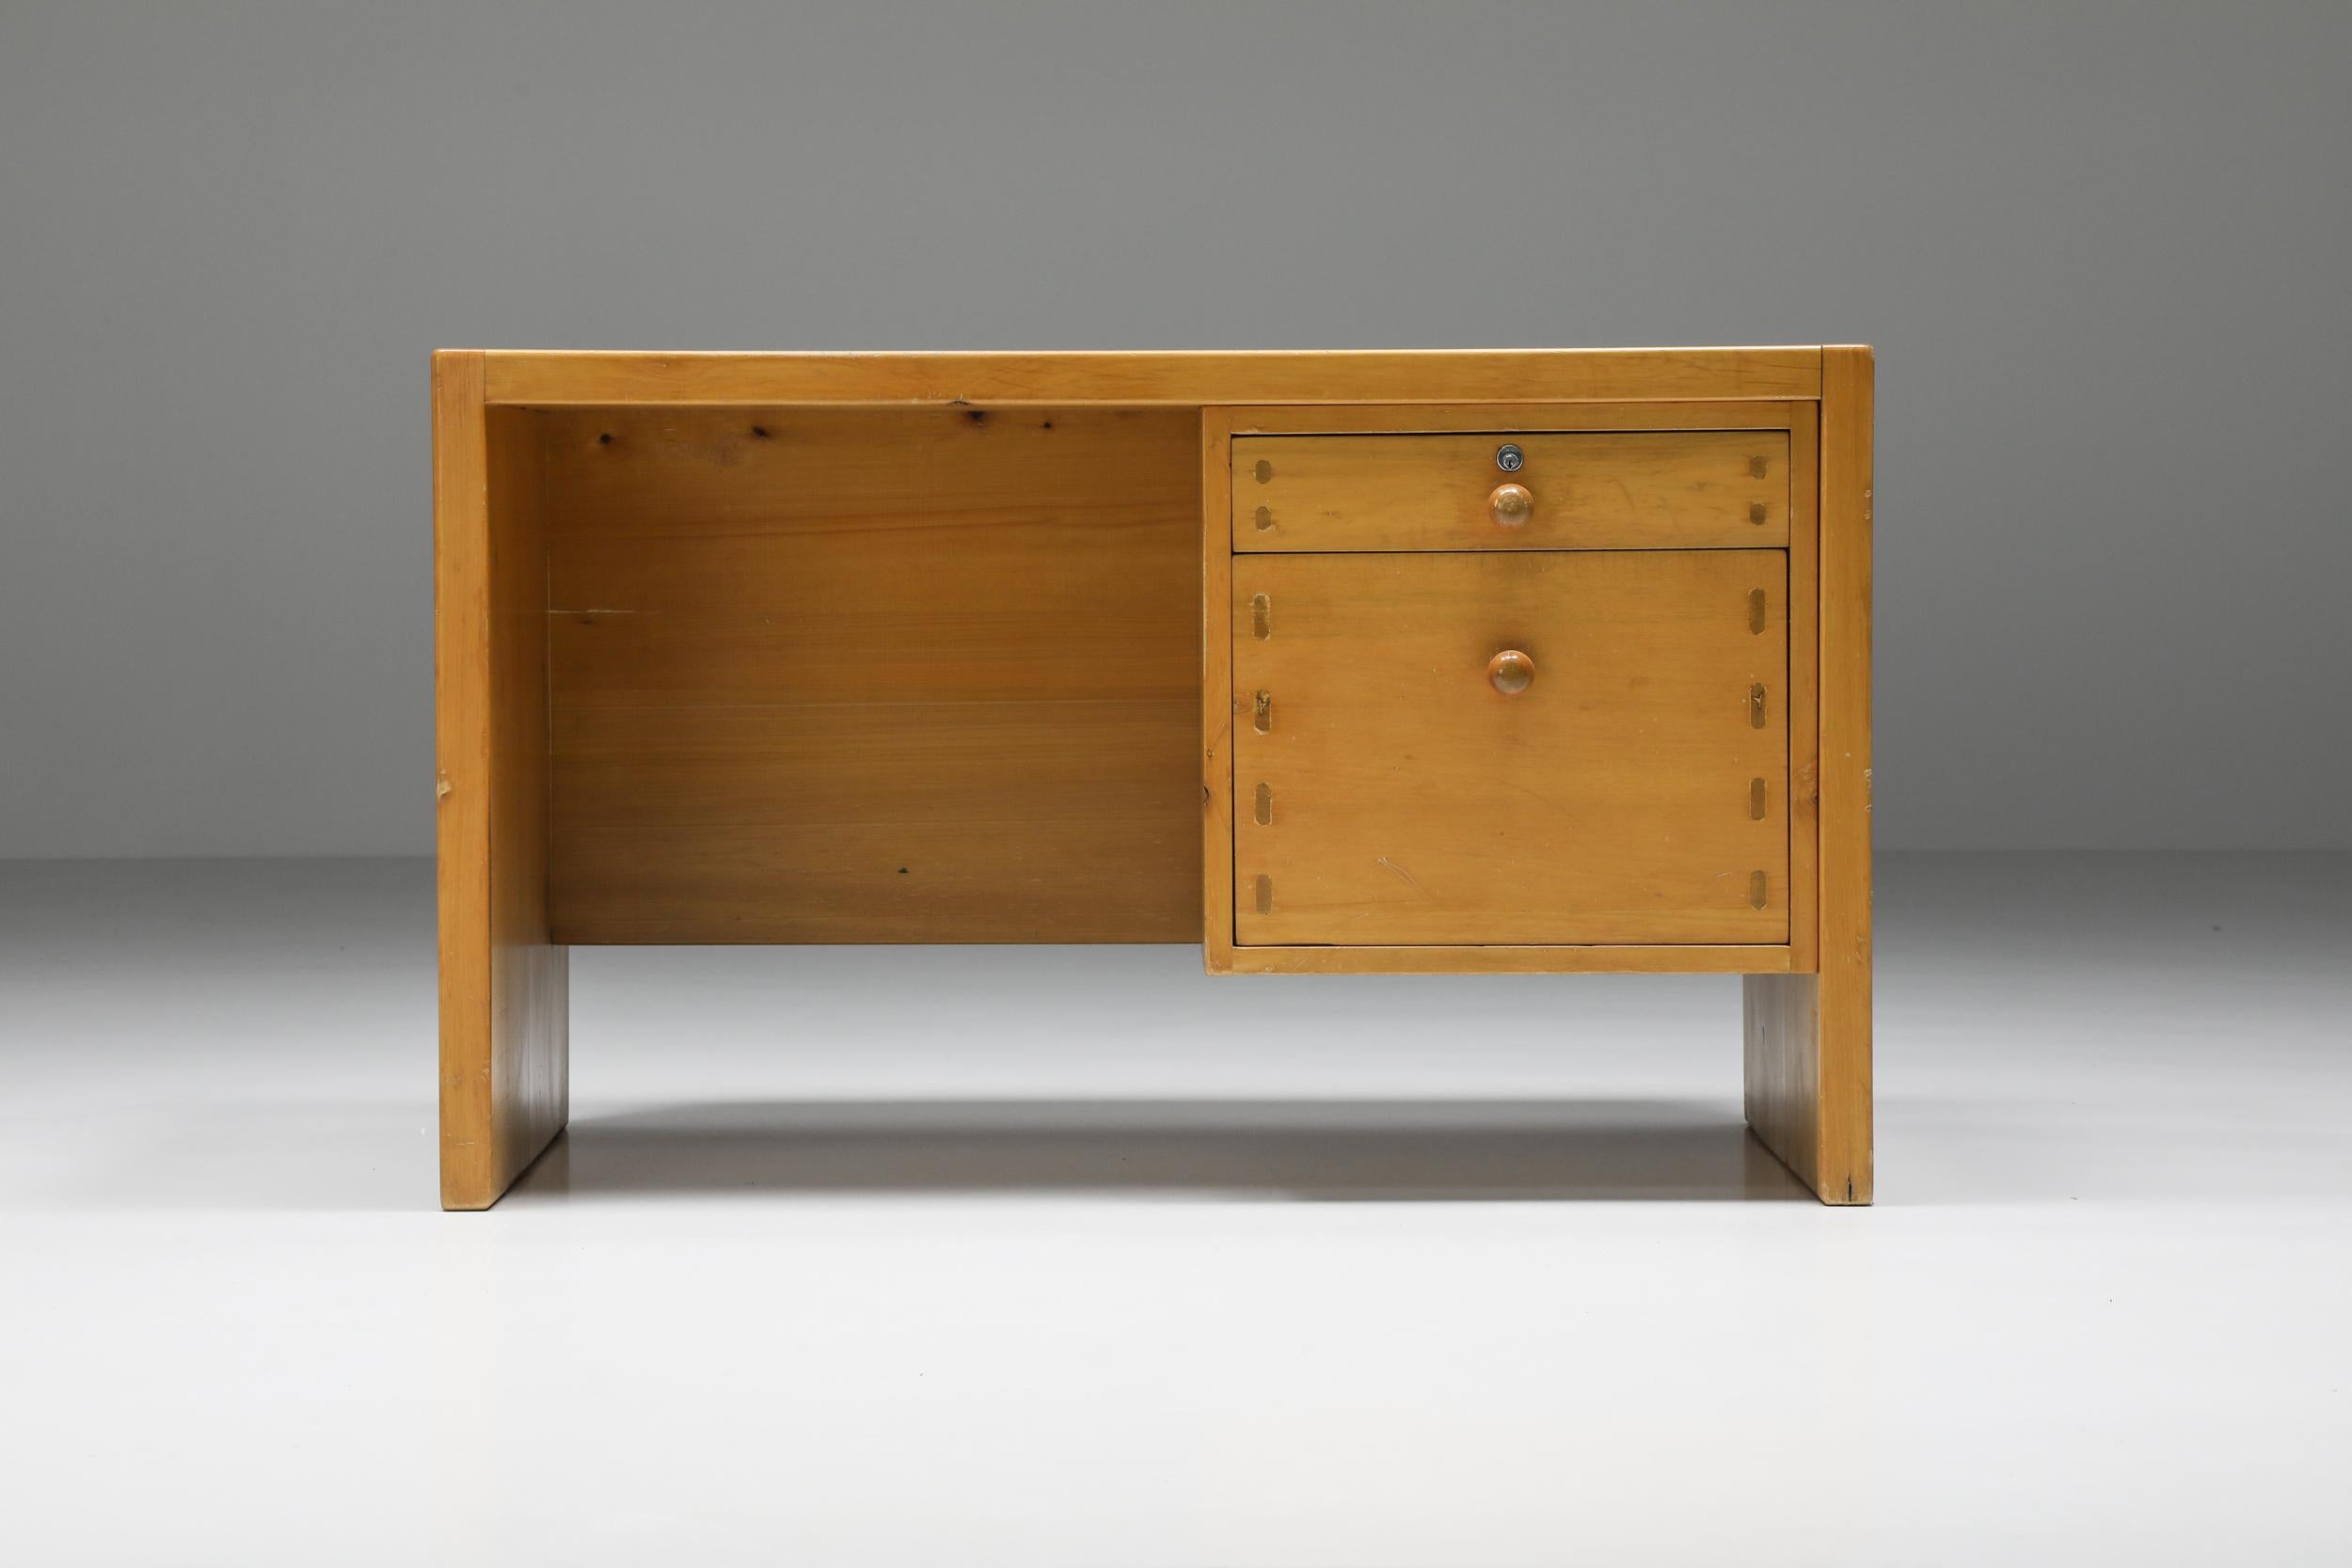 Pierre Chapo; 1960's; French Furniture design; Paris; Pinewood; le Corbusier; Jean Prouve; Eileen Gray; Collectible design; Modernism; Eclectic; Axel Vervoordt; Vincent Van Duysen; Japanese Joinery; Oriental; Office furniture; Desk; Writing table;